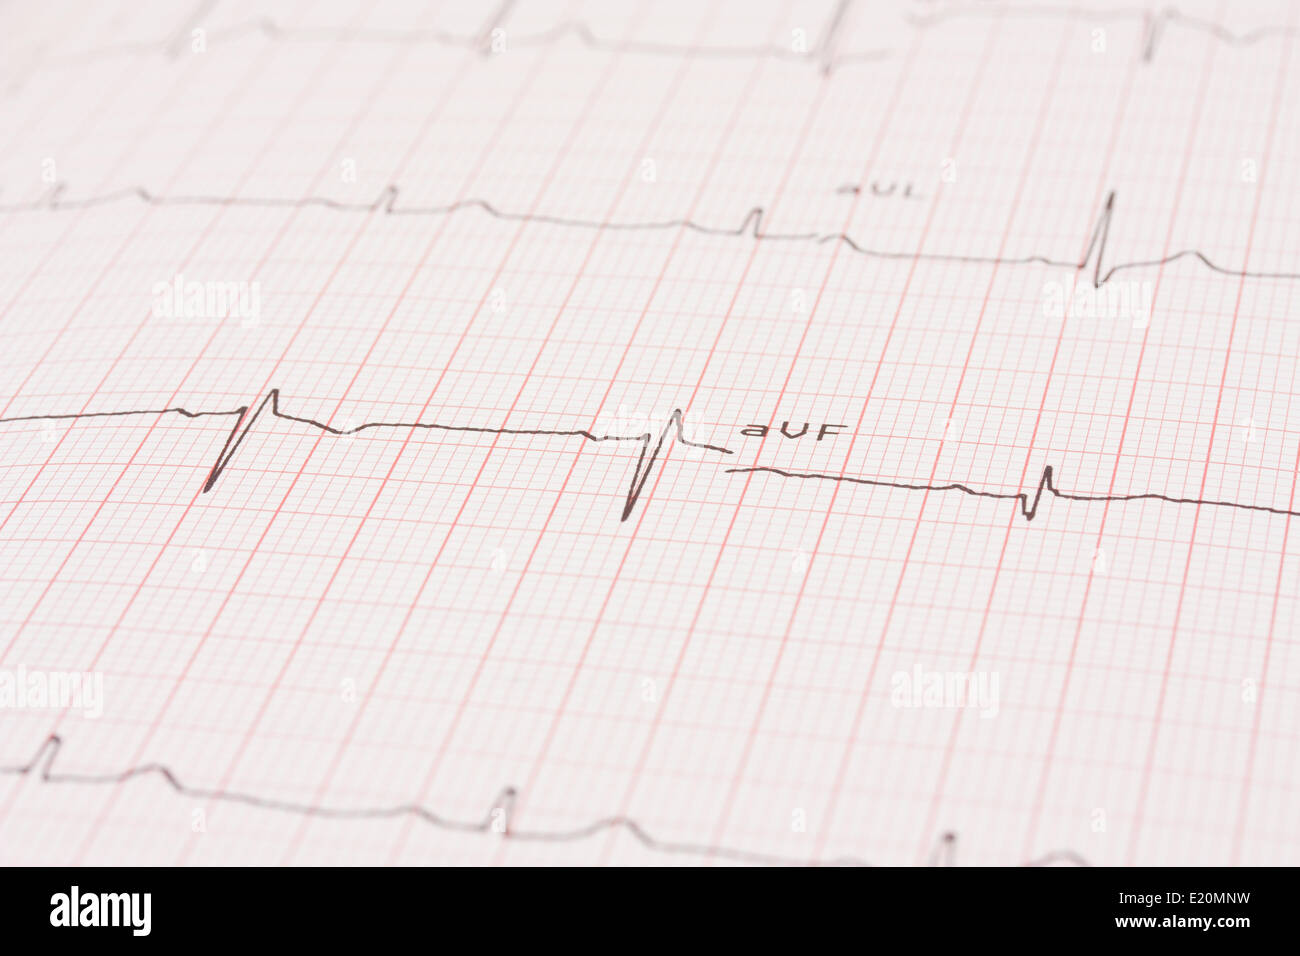 Detail of an electrocardiogram Stock Photo